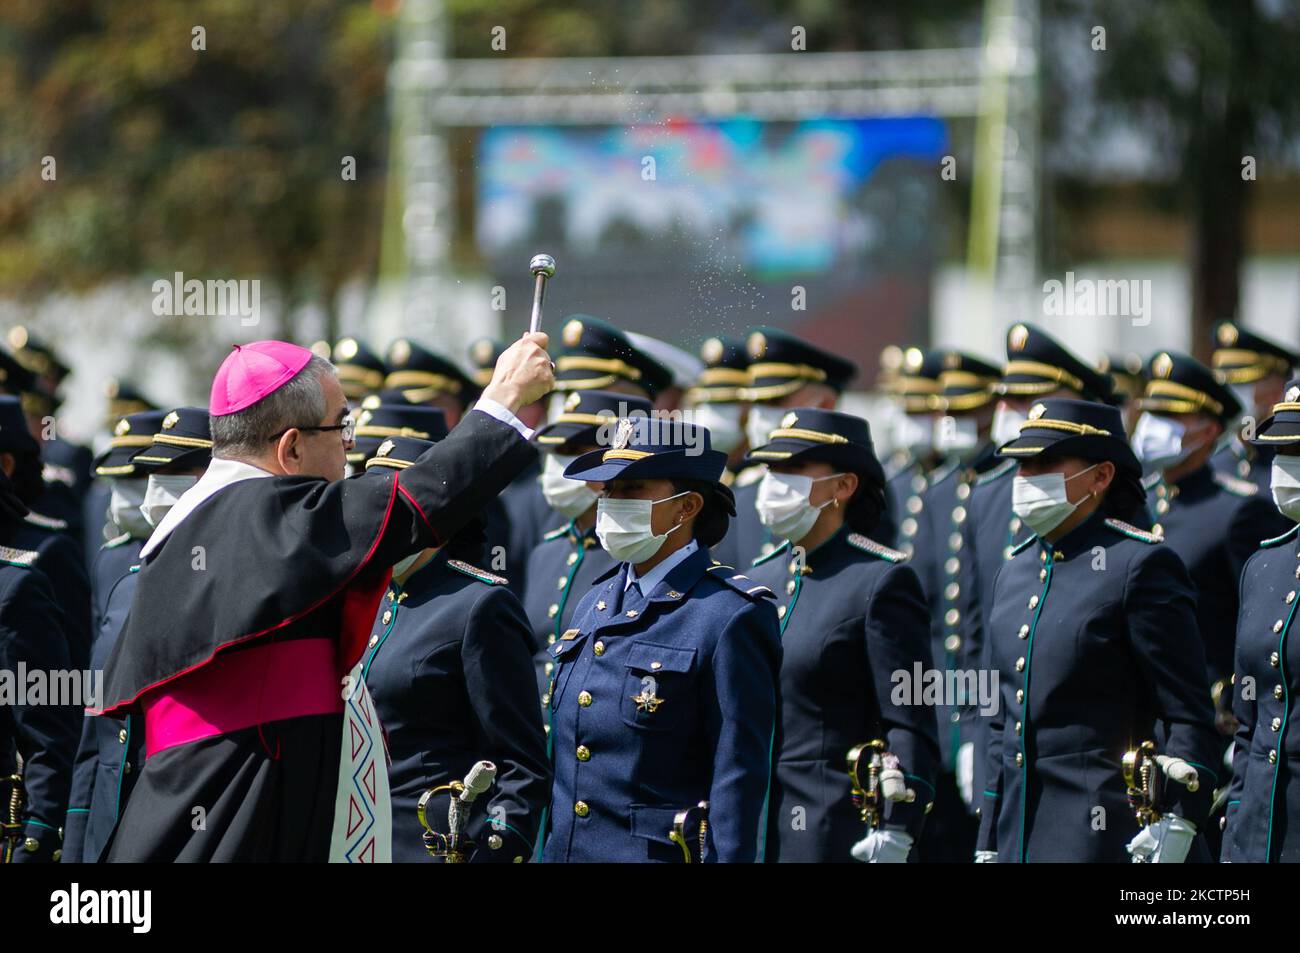 A priest sprays holy water to newly promoted Police officers participate in their promotion ceremony during an event were Colombia's president Ivan Duque Marquez and Colombia's Minister of Defense Diego Molano in conmmemoration of the 130 anniversary of Colombia's National Police and the promotion to officers to more than a 100 police members, in Bogota, Colombia on November 11, 2021. (Photo by Sebastian Barros/NurPhoto) Stock Photo